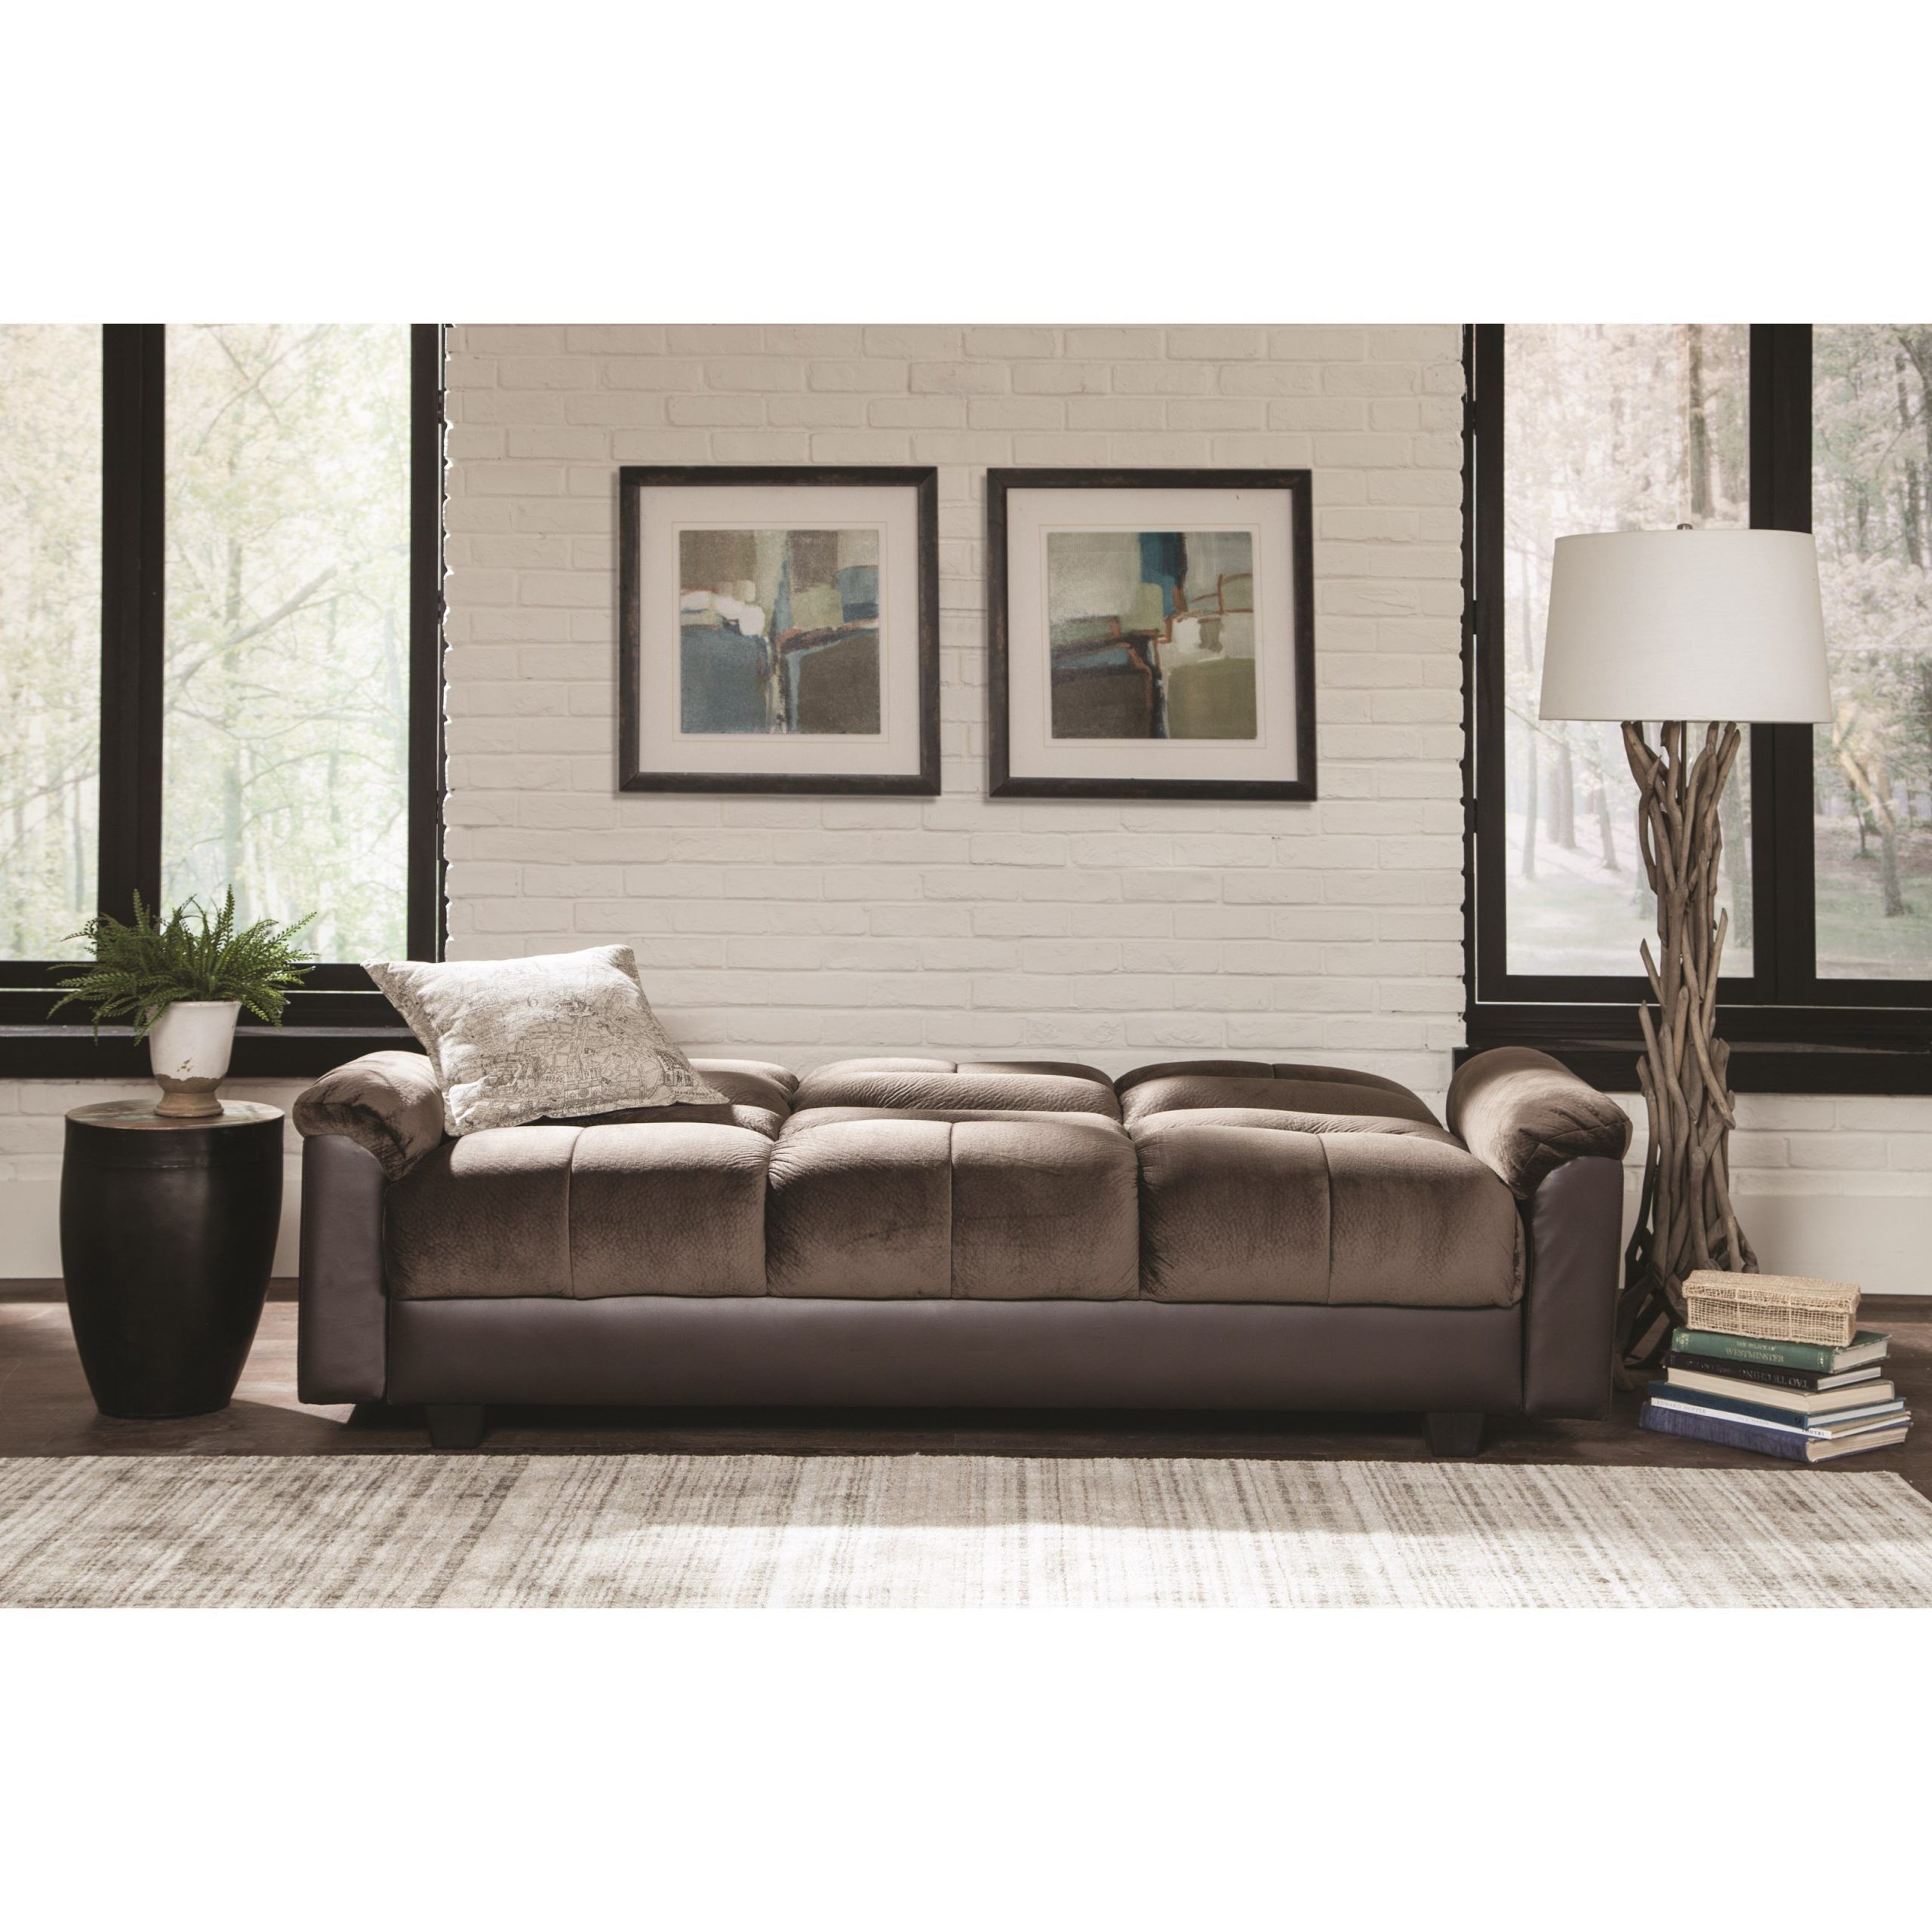 Sofa Beds And Futons Two Tone Sofa Bed With Storage Throughout Celine Sectional Futon Sofas With Storage Reclining Couch (View 15 of 15)